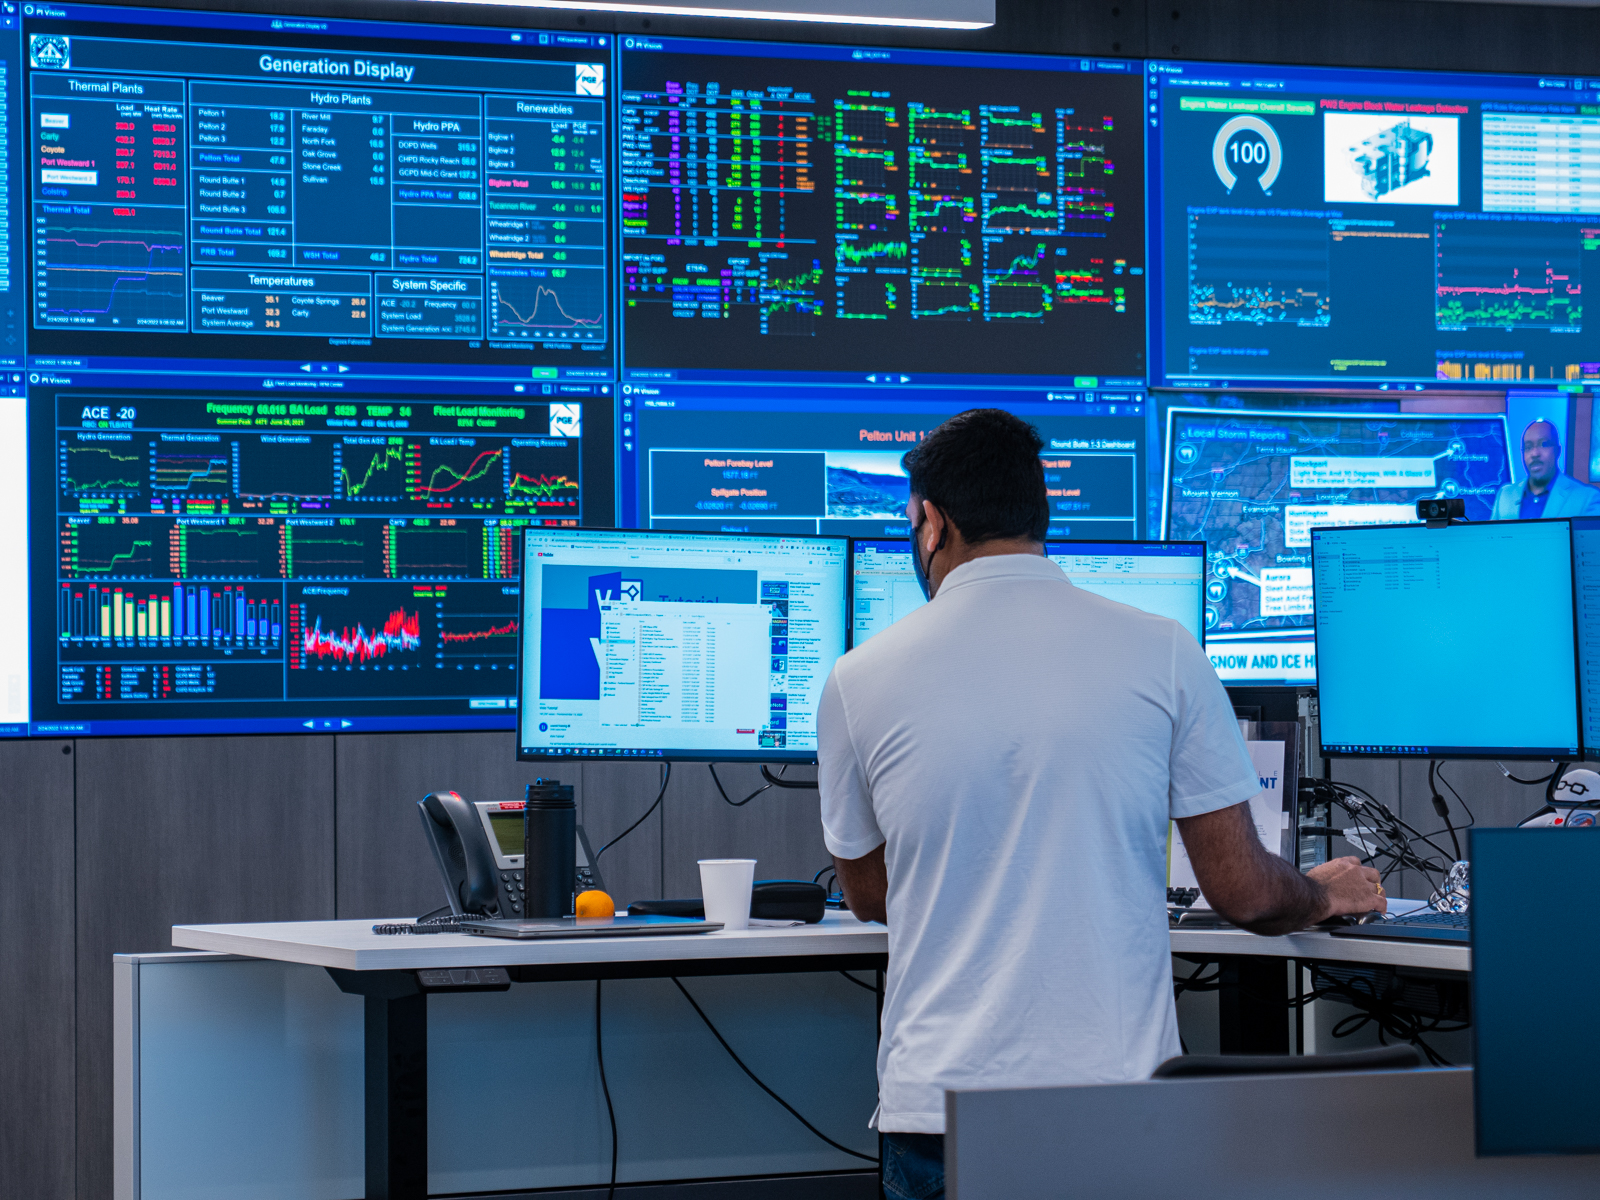 Mauell created generation control room operator monitoring display information in real-time